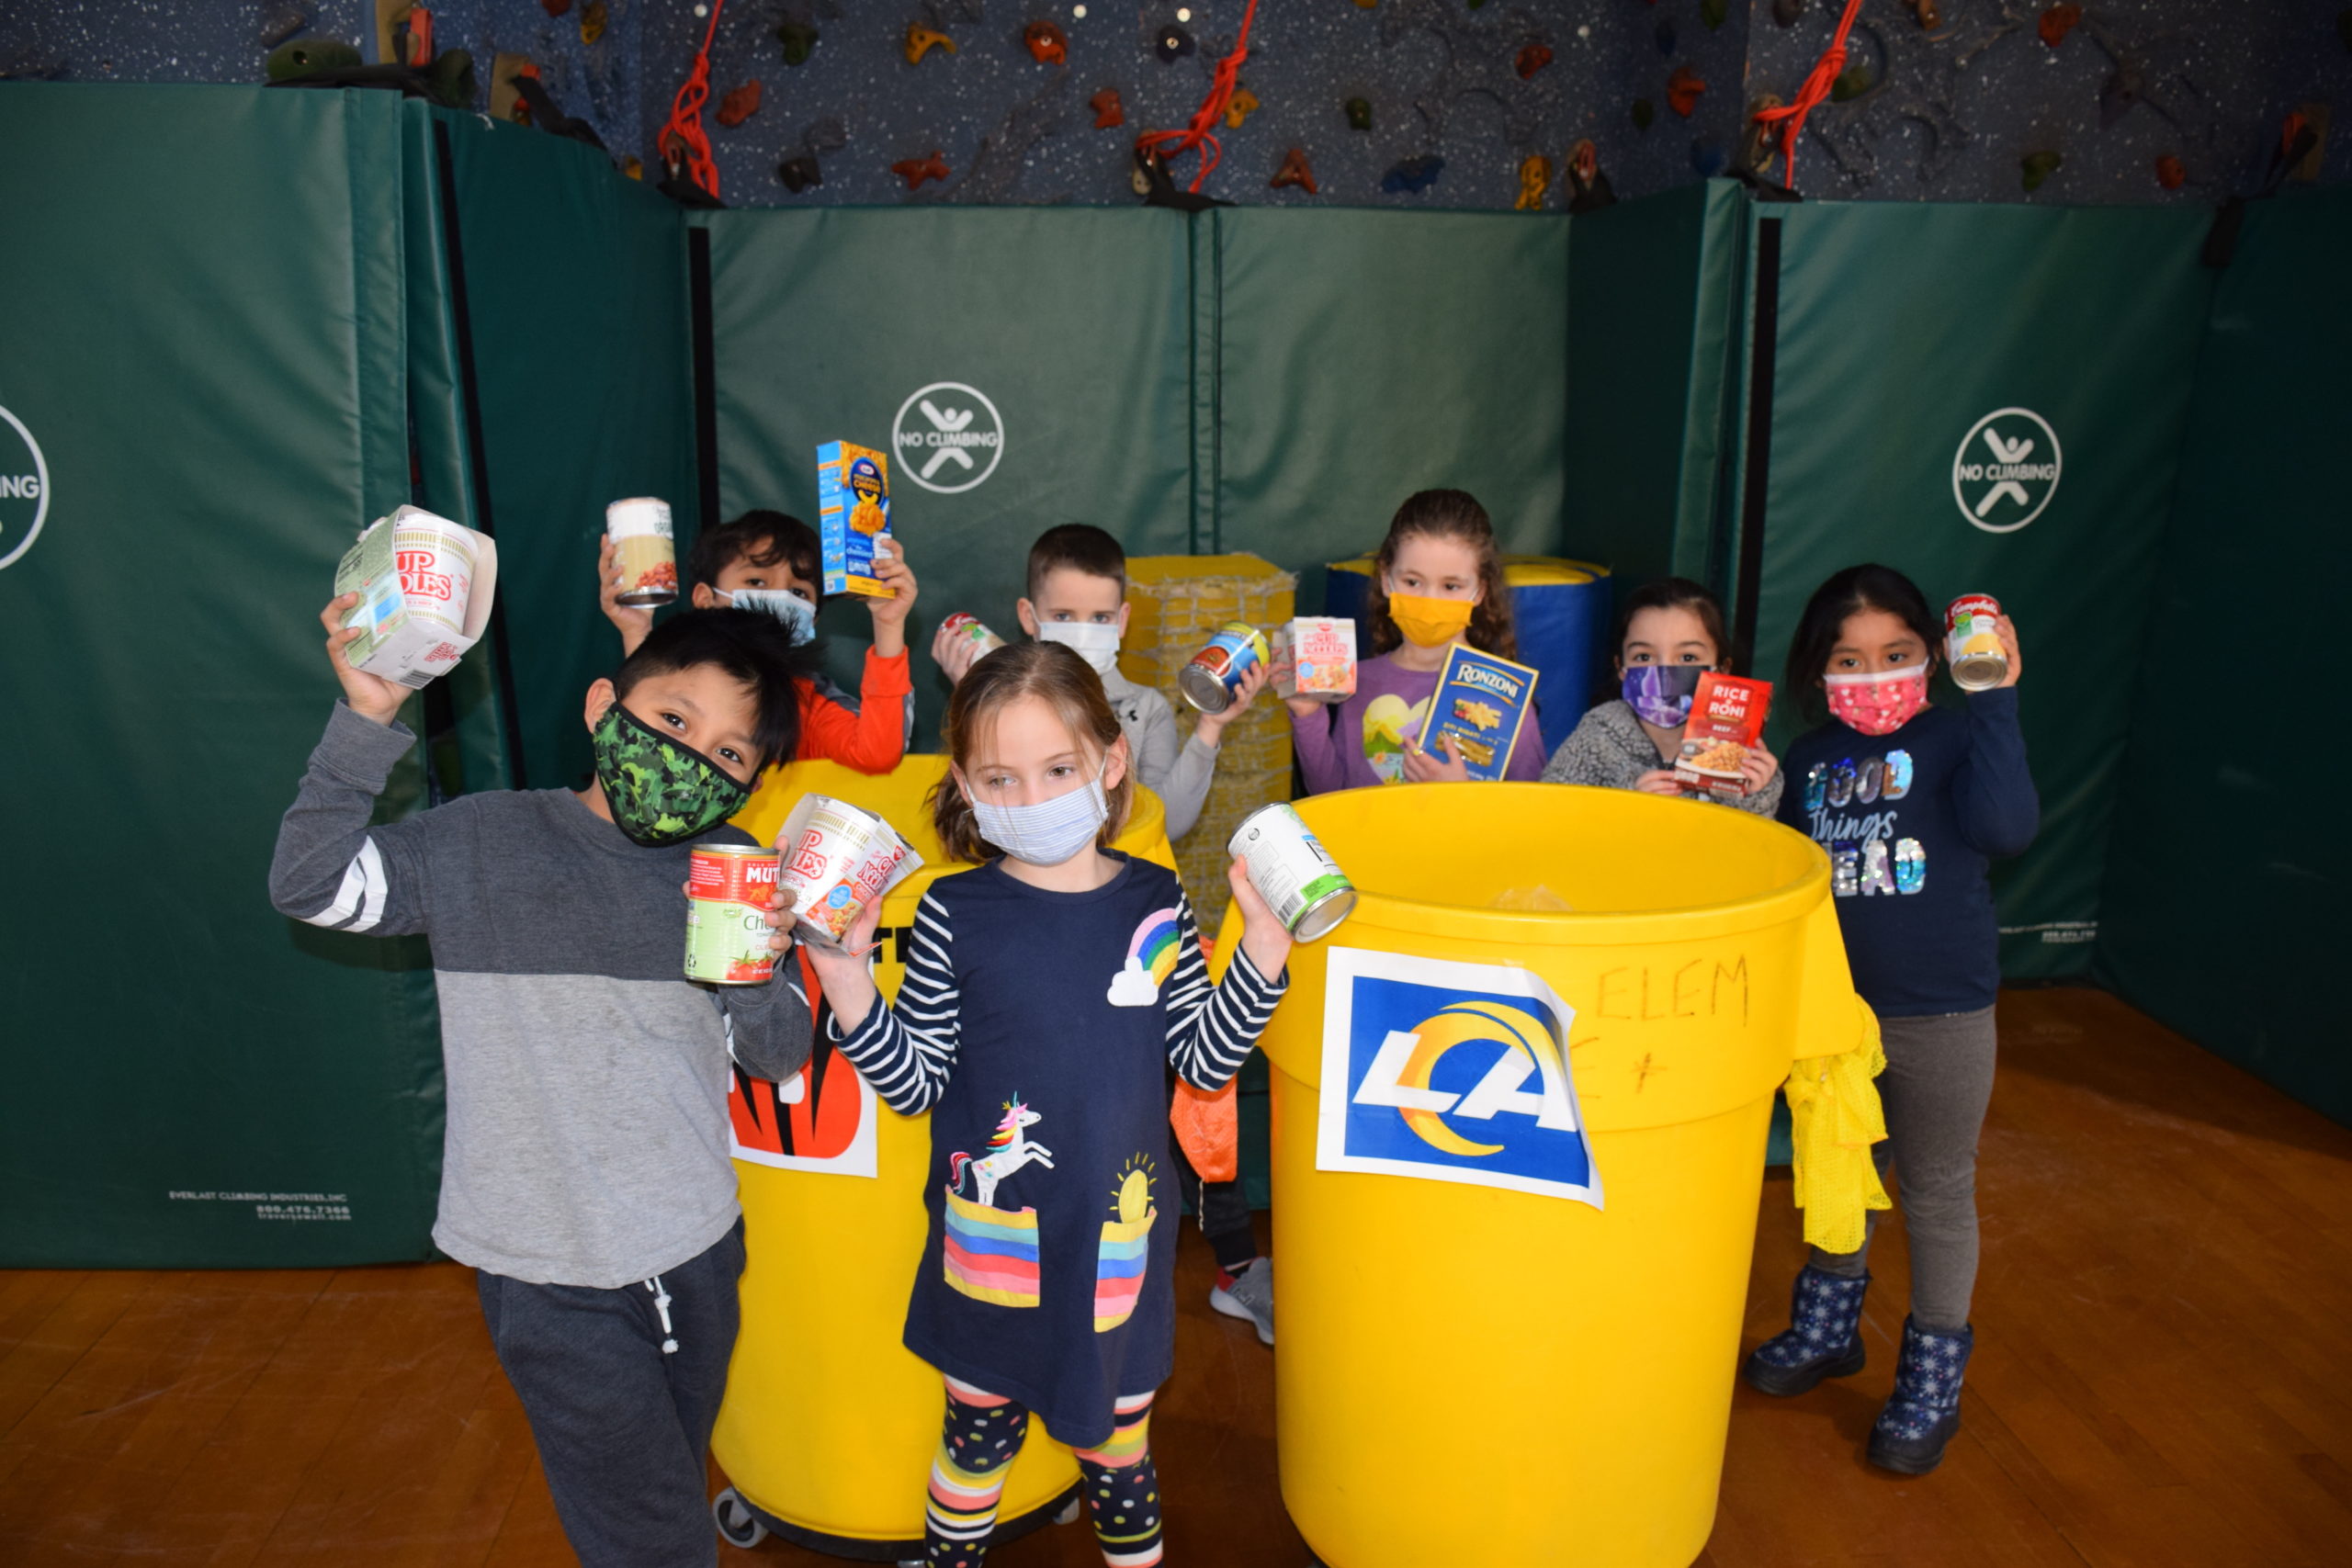 Westhampton Beach Elementary School students made predictions on which team would win Super Bowl LVI, through its annual Souper Bowl fundraiser. Donations of nonperishable goods were used to vote for the team they thought would win this year’s Super Bowl by placing them in a team bin. The final tally indicated that 73students guessed the Los Angeles Rams would win and 138 thought the Cincinnati Bengals would take home the title. All items collected will be donated to local food pantries.